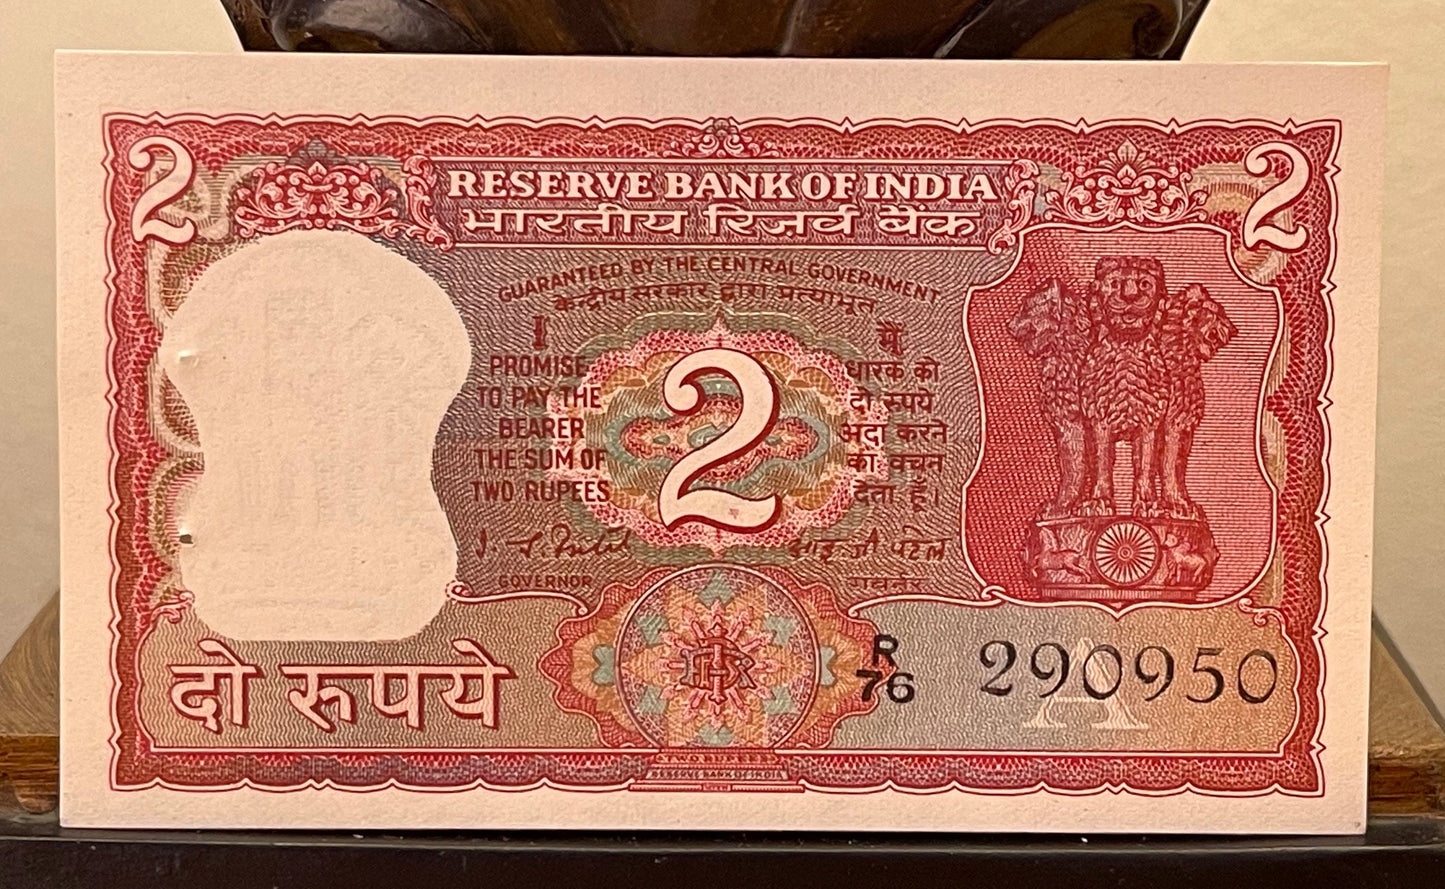 Royal Bengal Tiger & Ashoka Lion Capitol 2 Rupees India Authentic Banknote Money for Jewelry and Crafts Making (Watermark)